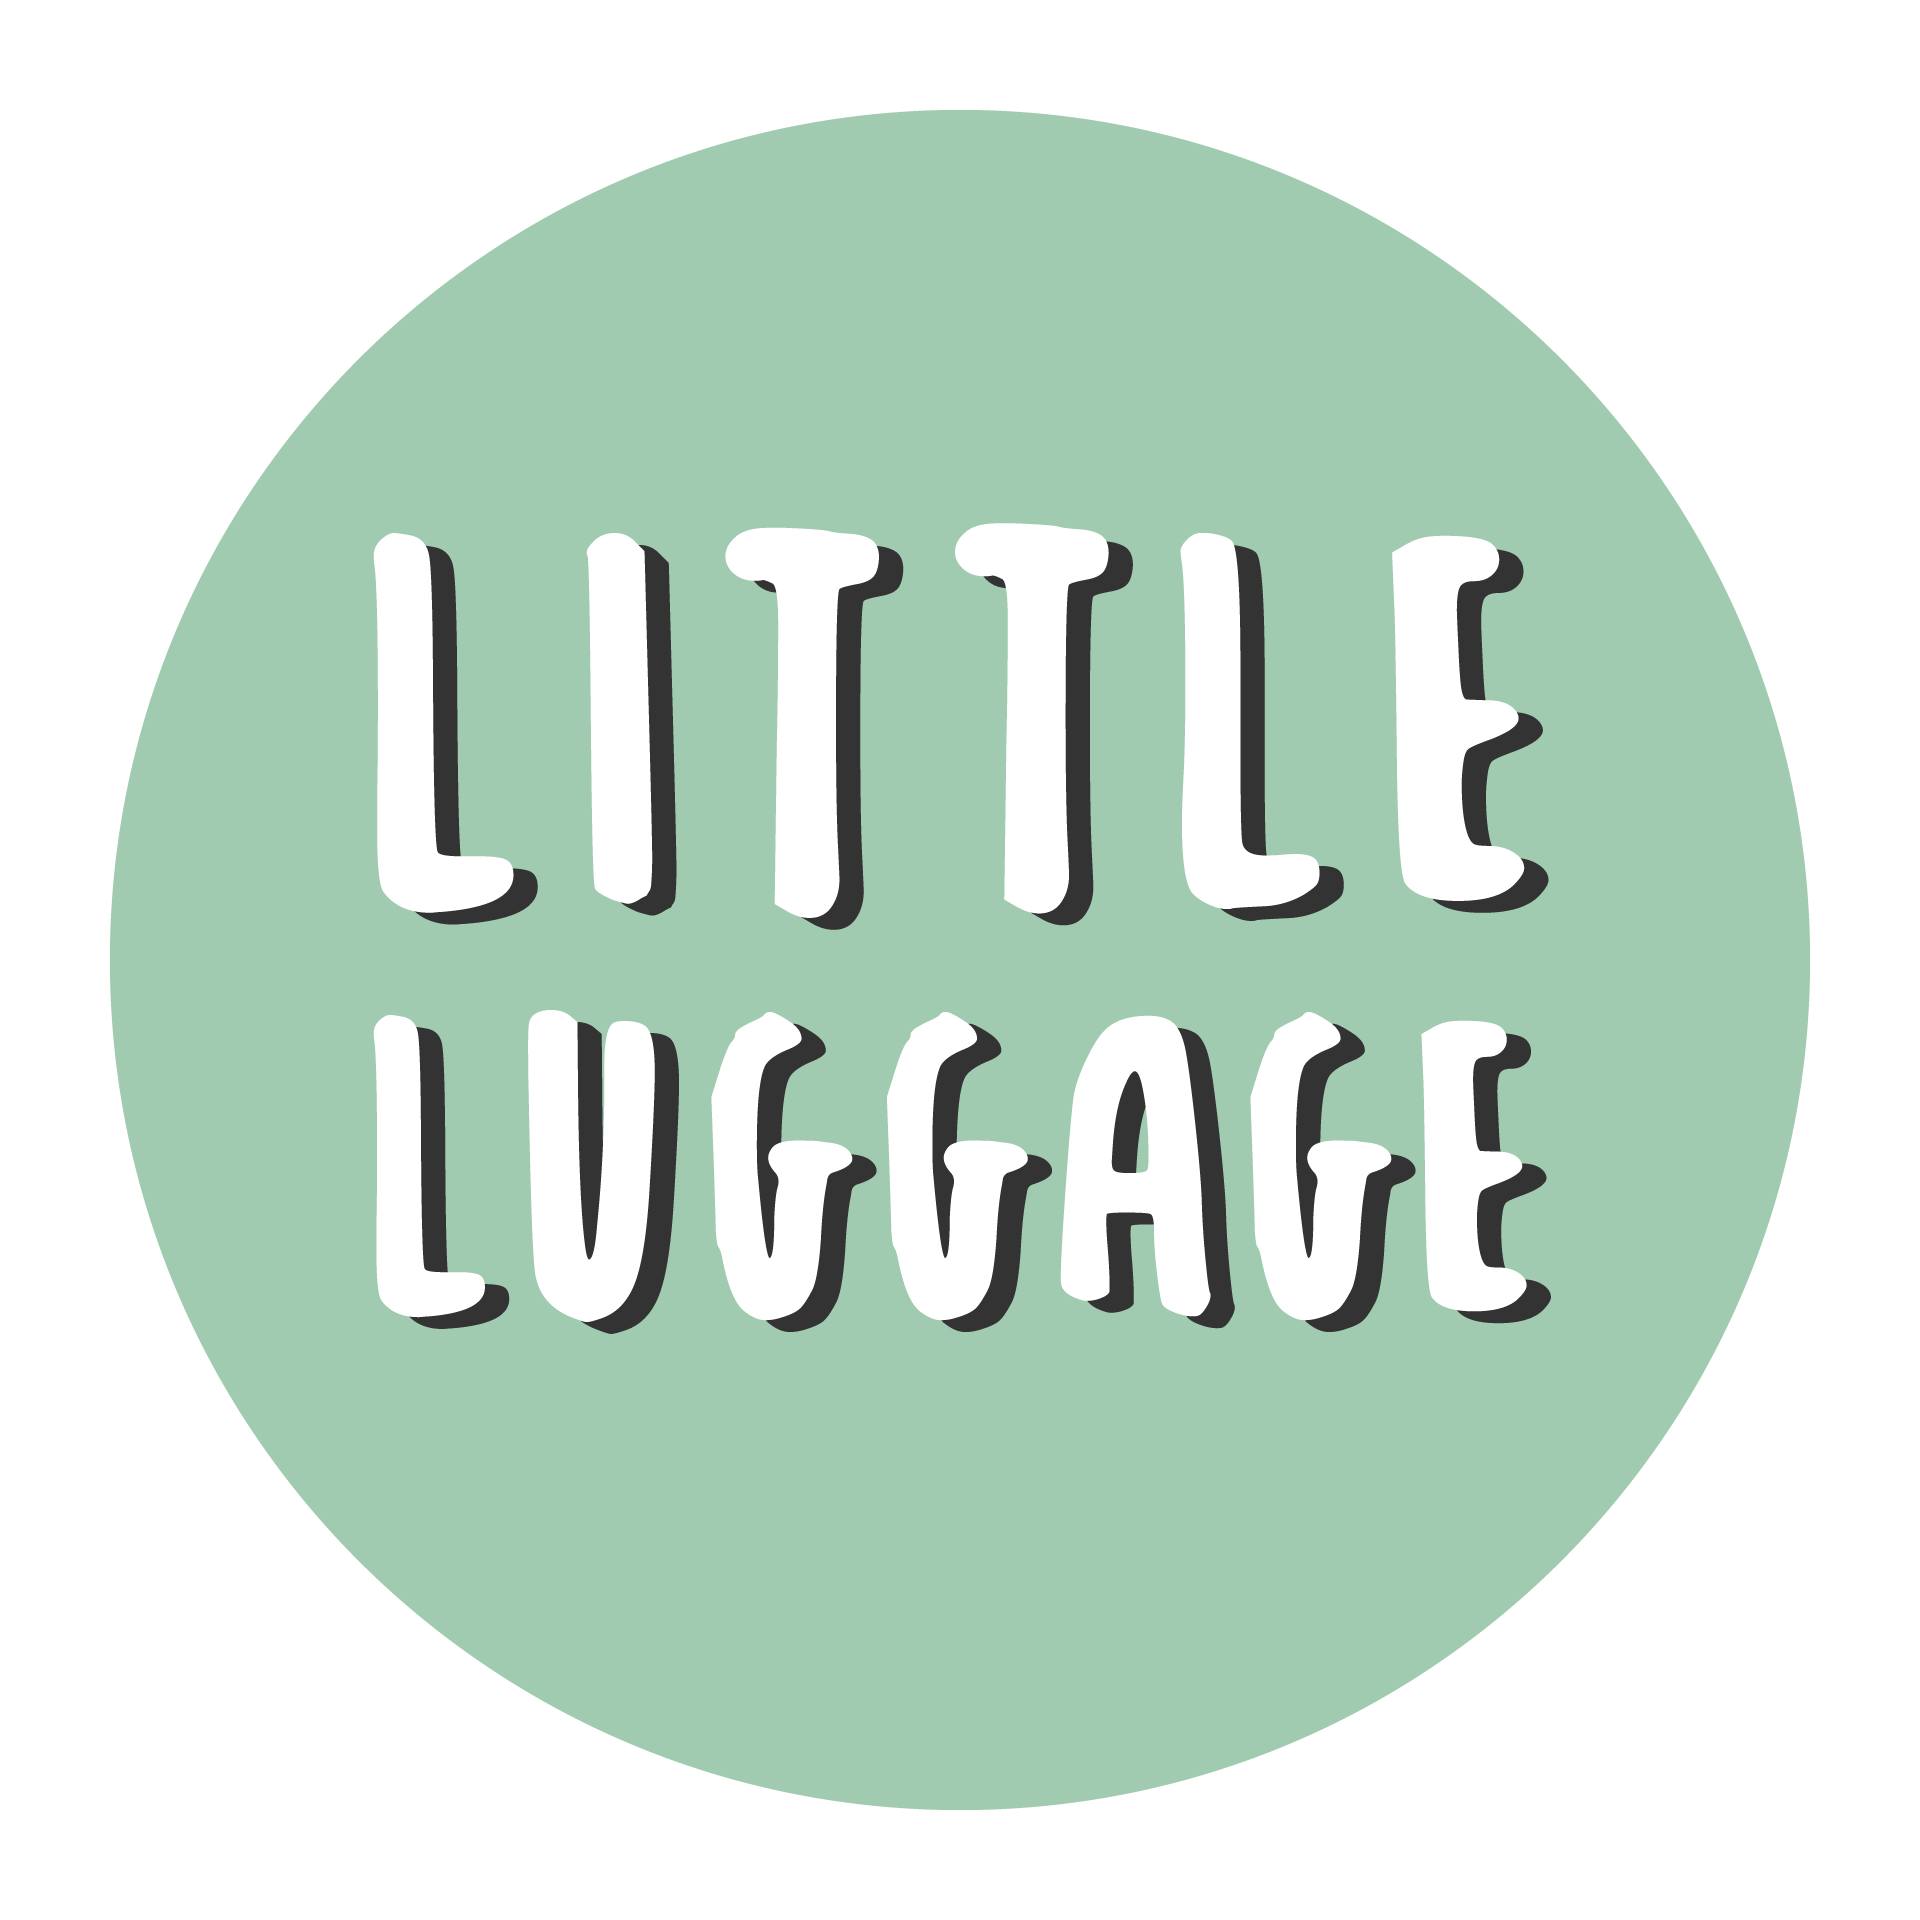 EXHIBITOR: The Little Luggage Co